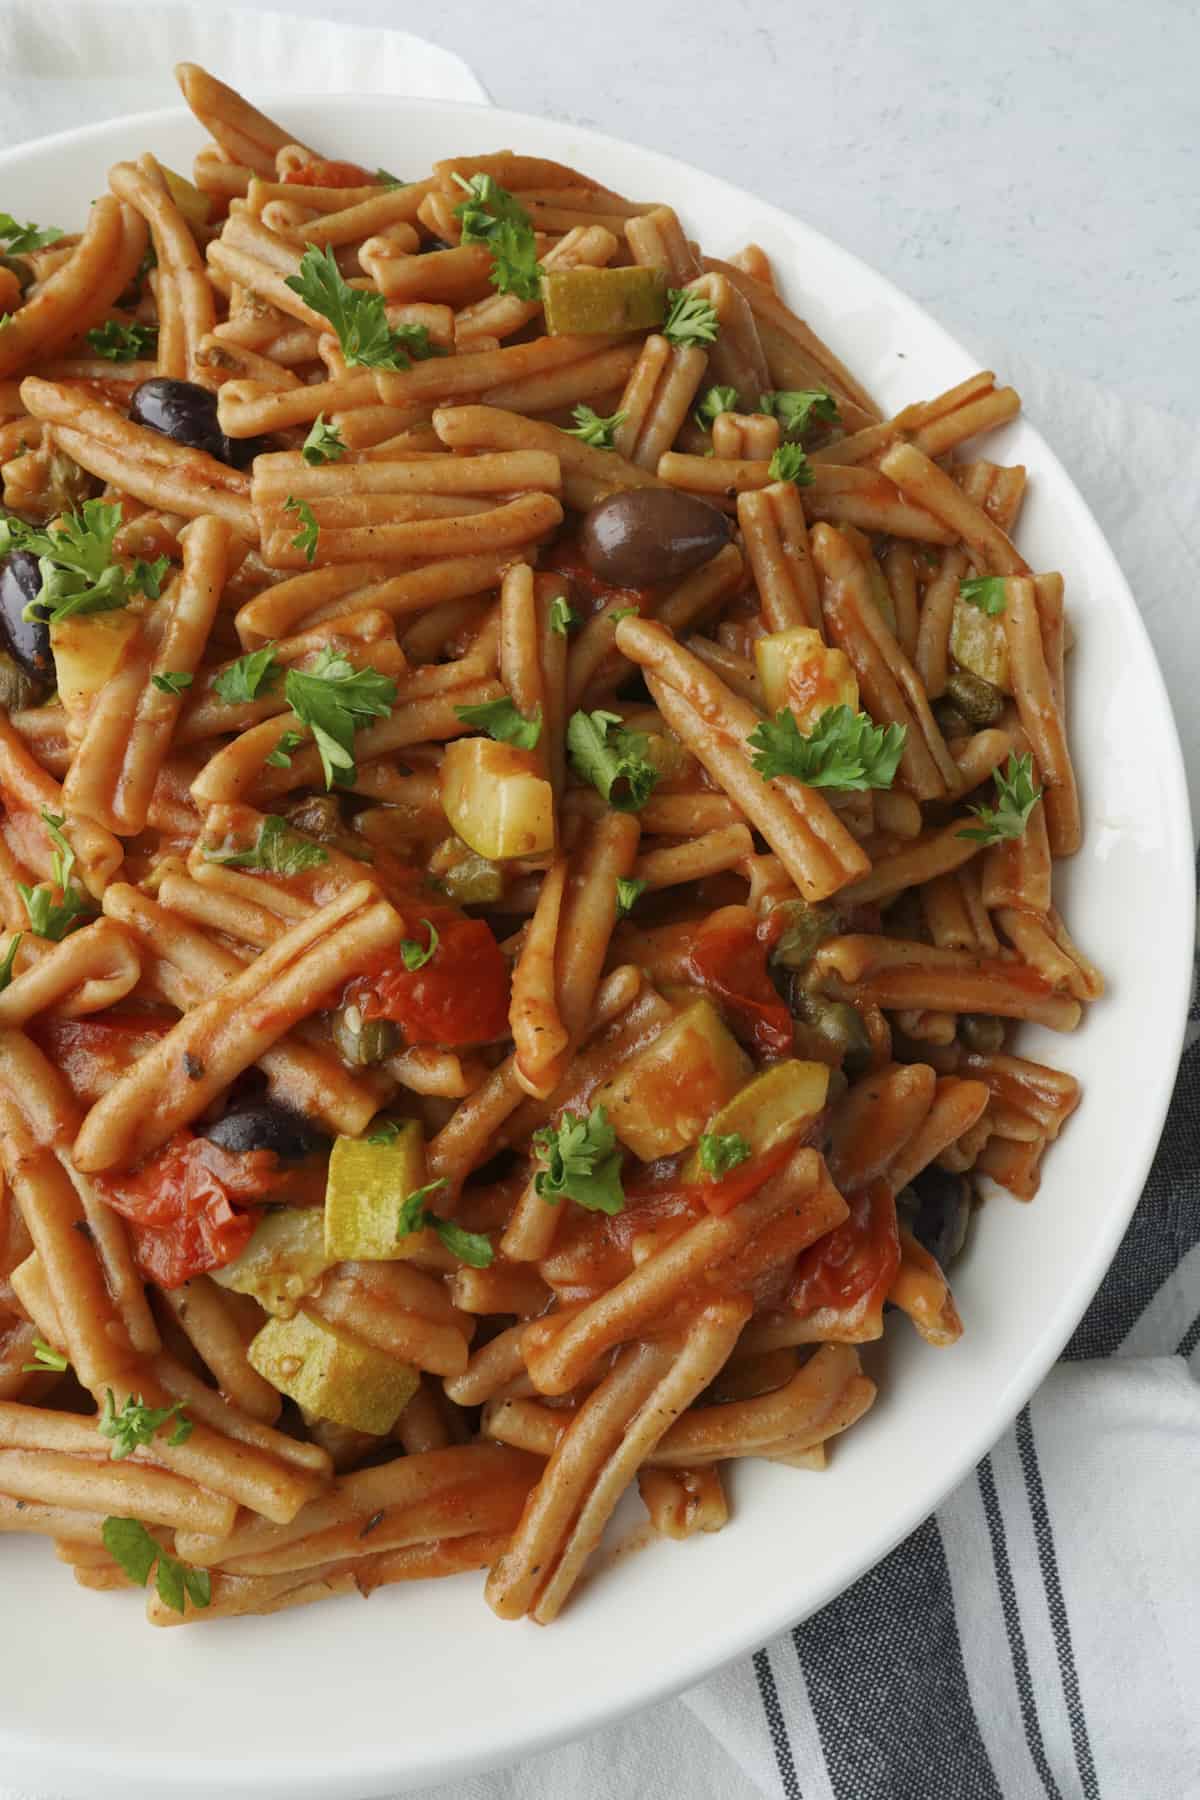 o bowl of pasta puttanesca with whole wheat pasta